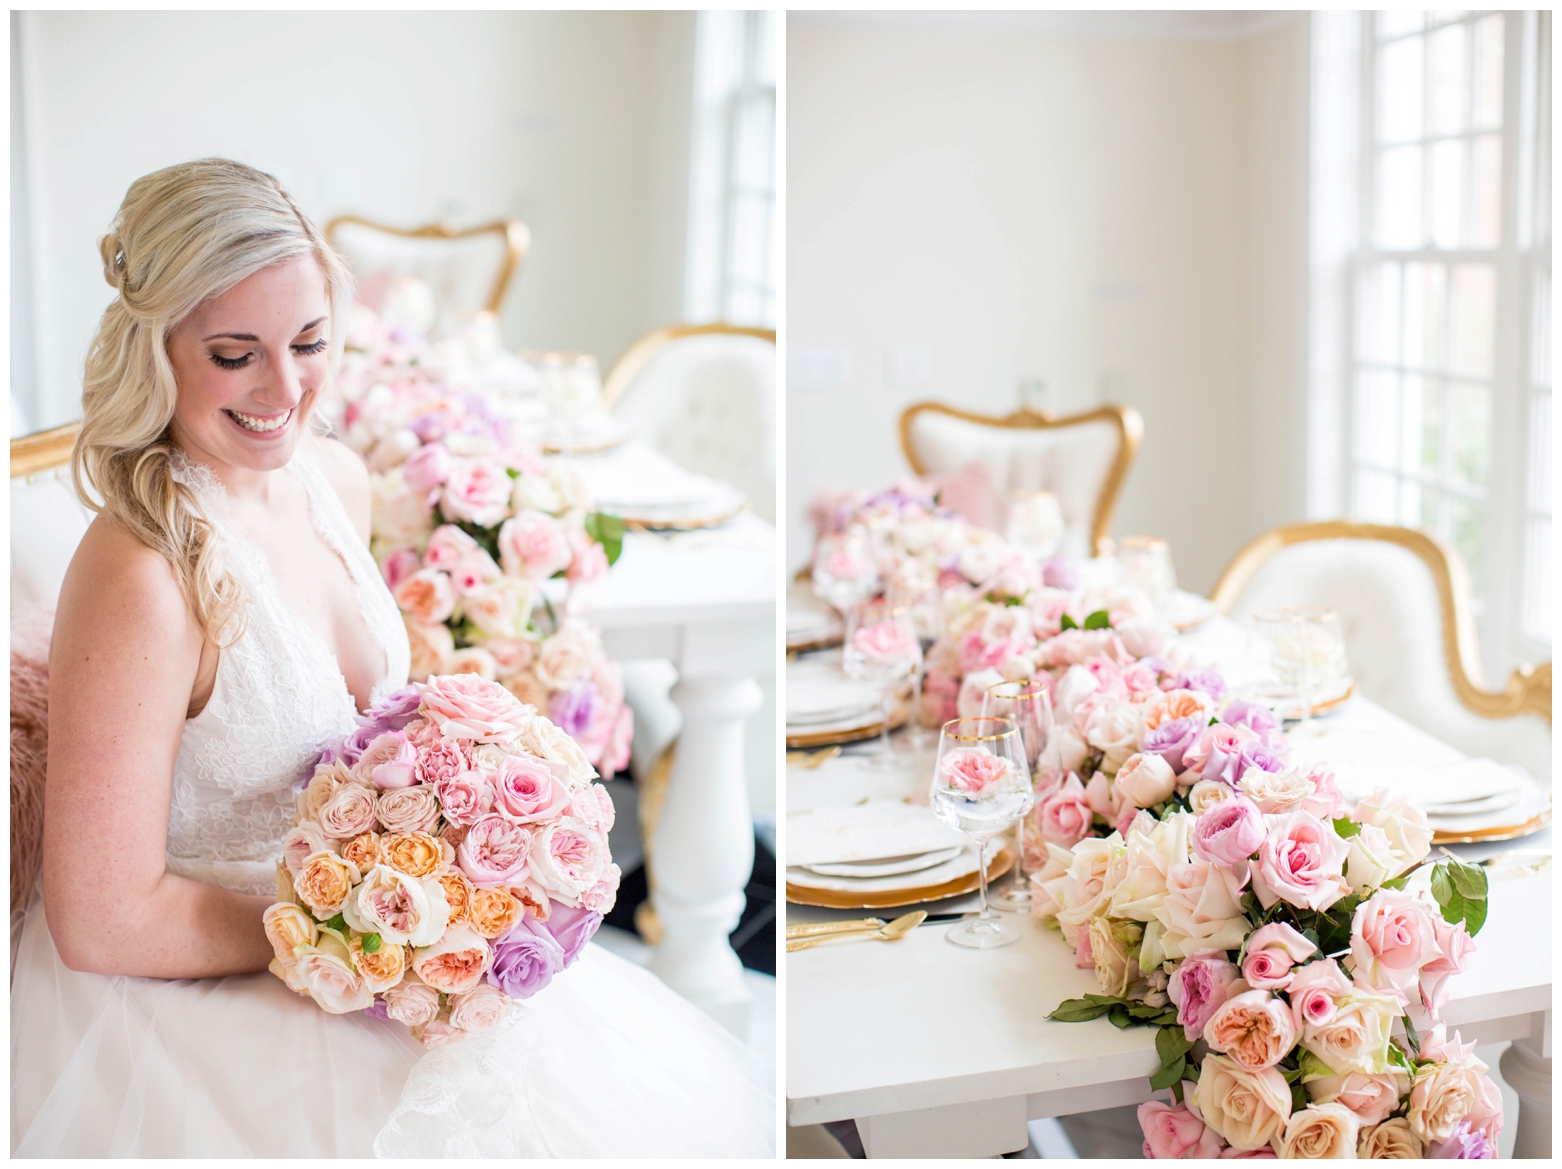 View More: http://hopetaylorphotographyphotos.pass.us/marie-antoinette-inspired-styled-shoot